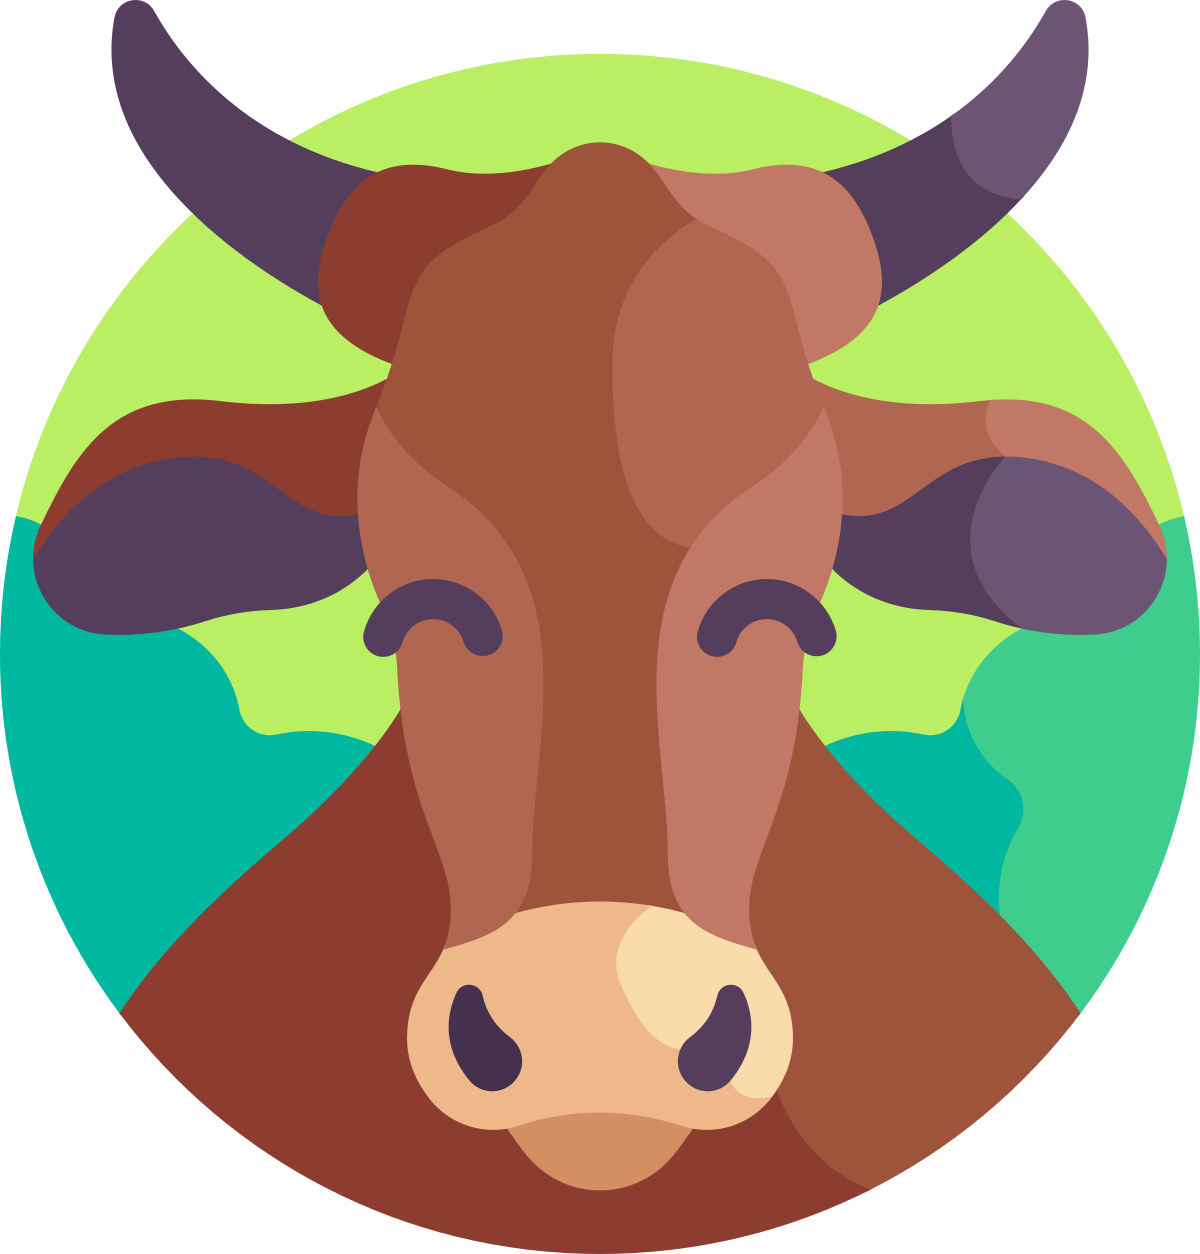 The Chinese horoscope for Ox